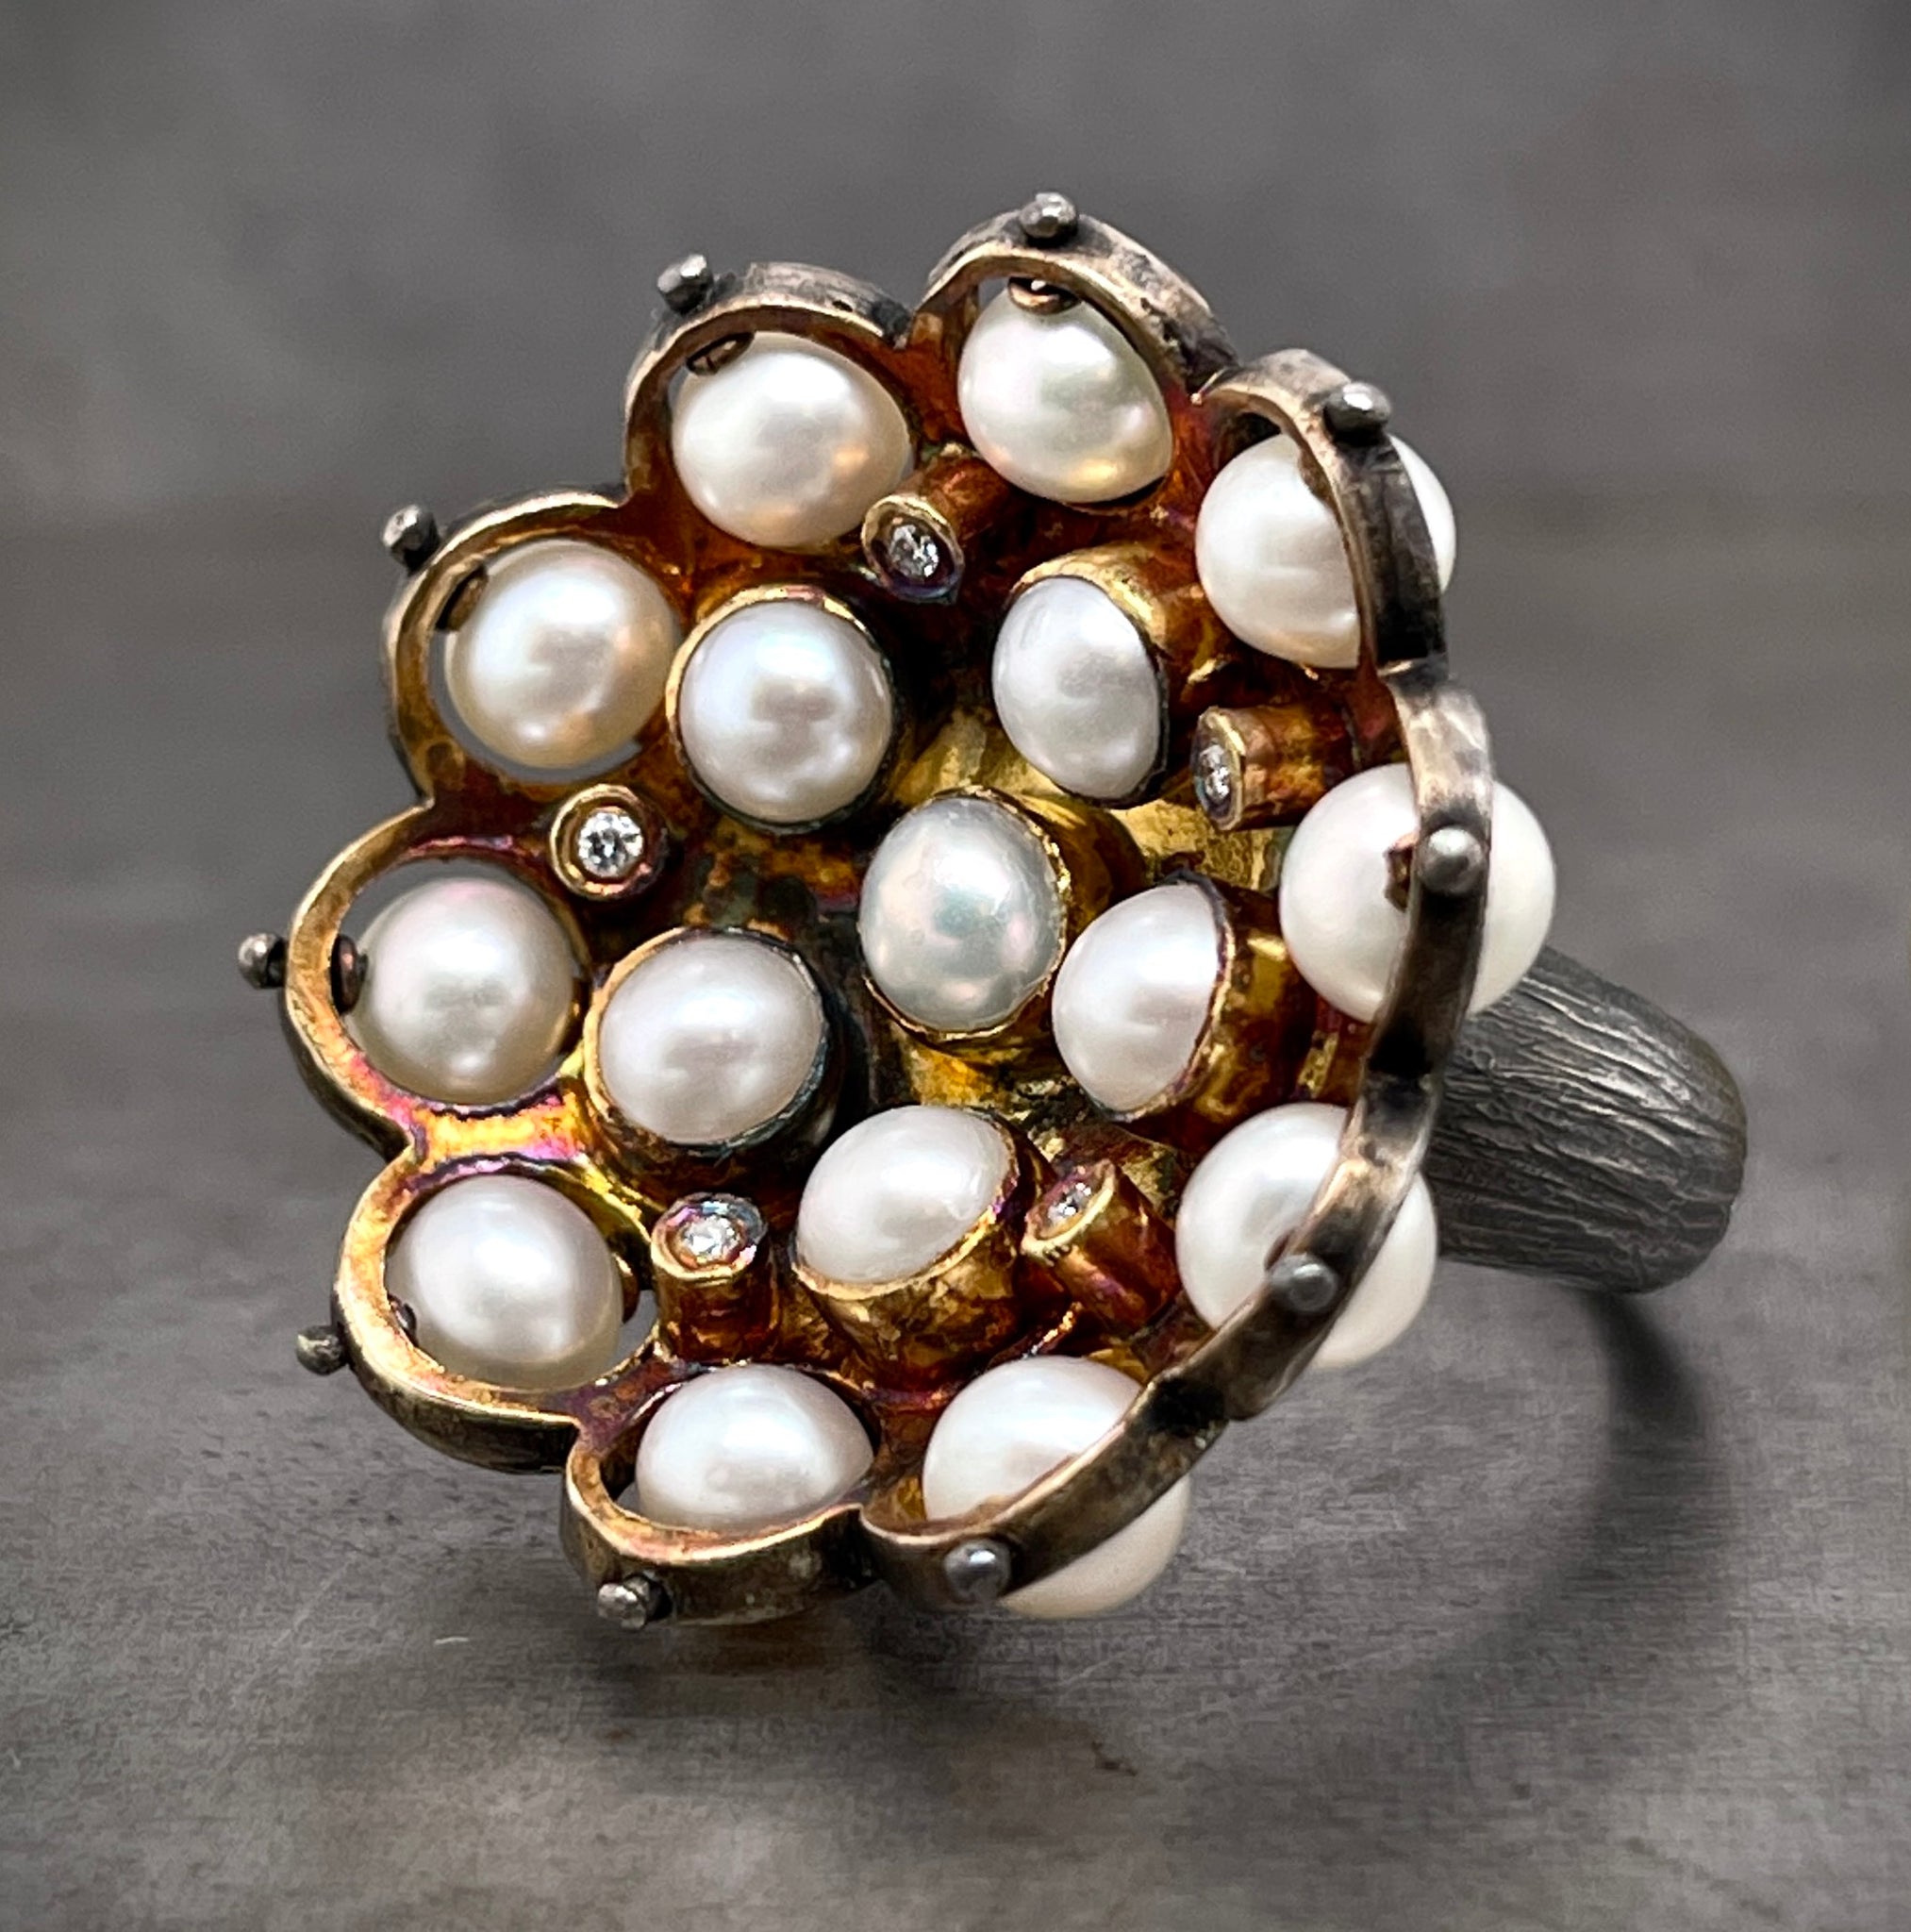 Angled side view of pearl and diamond cocktail ring. In the center there are six pearls bezel set in the formation of a flower. In between each pearl is a bezel set round brilliant diamond. The outer layer of the ring features ten pearl set on a wire so they can rotate and be moved. The inside of the ring features an oxidized yellow gold coloring, the outside is oxidized silver with a bark texture on the shank.